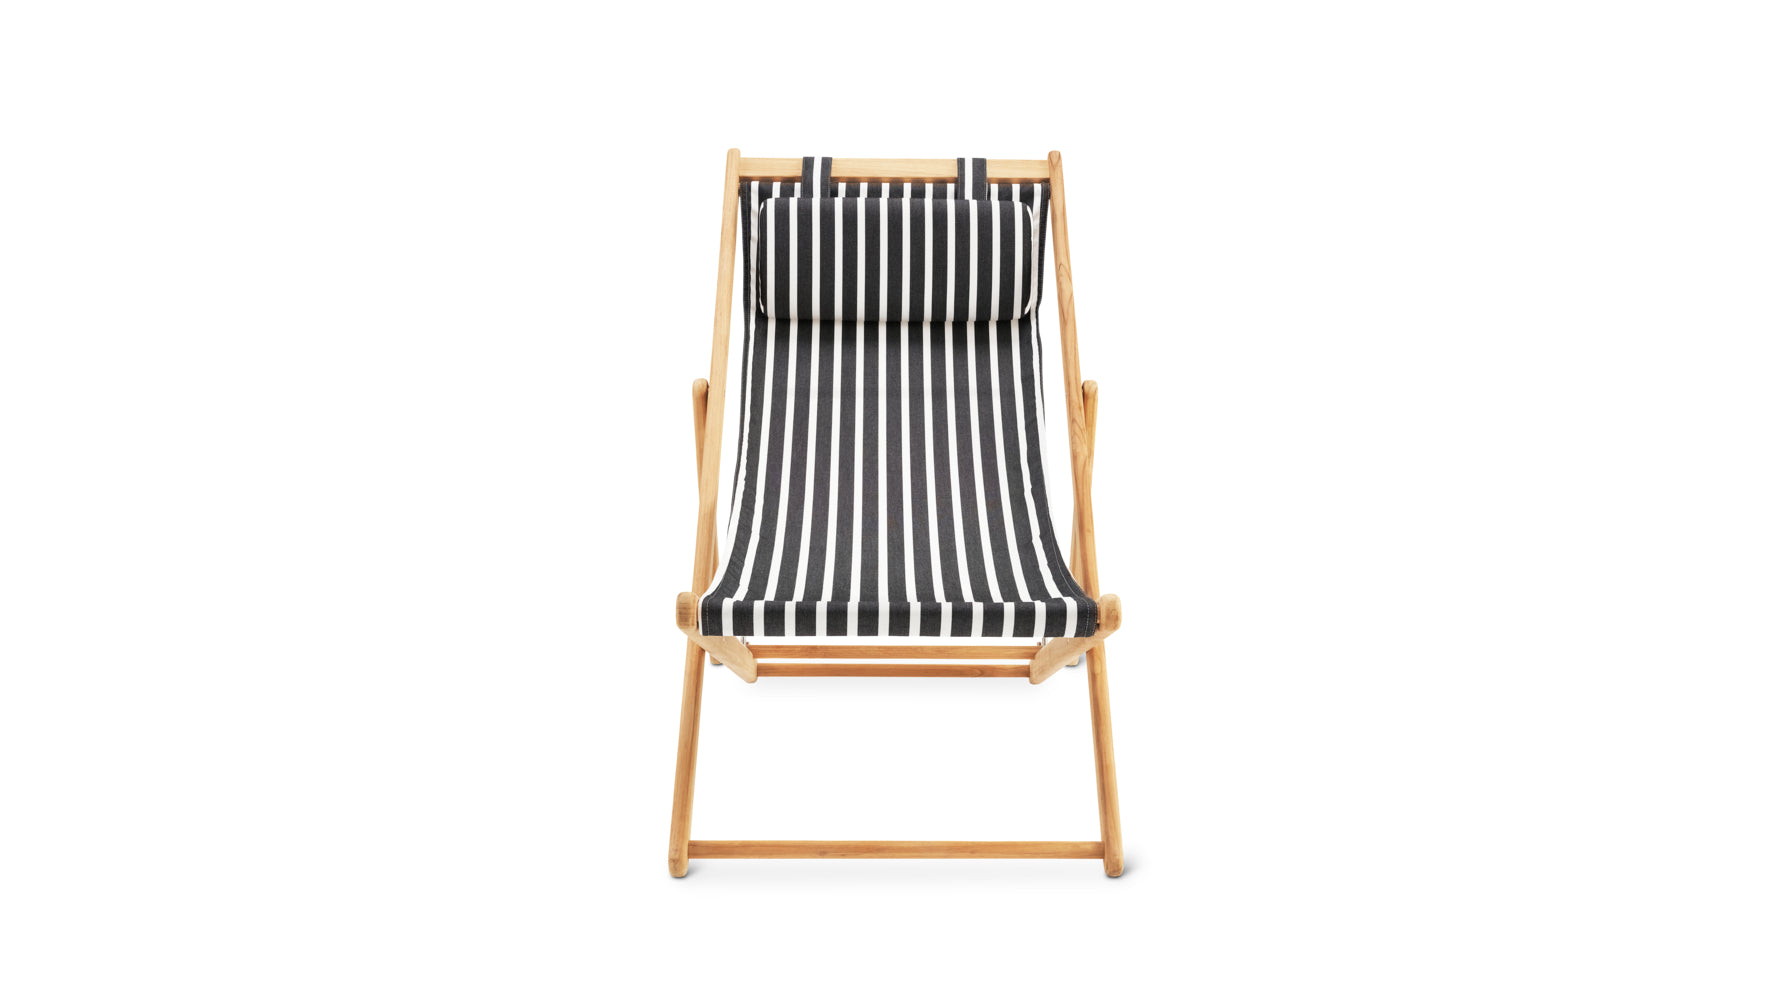 Settle In Outdoor Deck Chair, Black Sand - Image 1